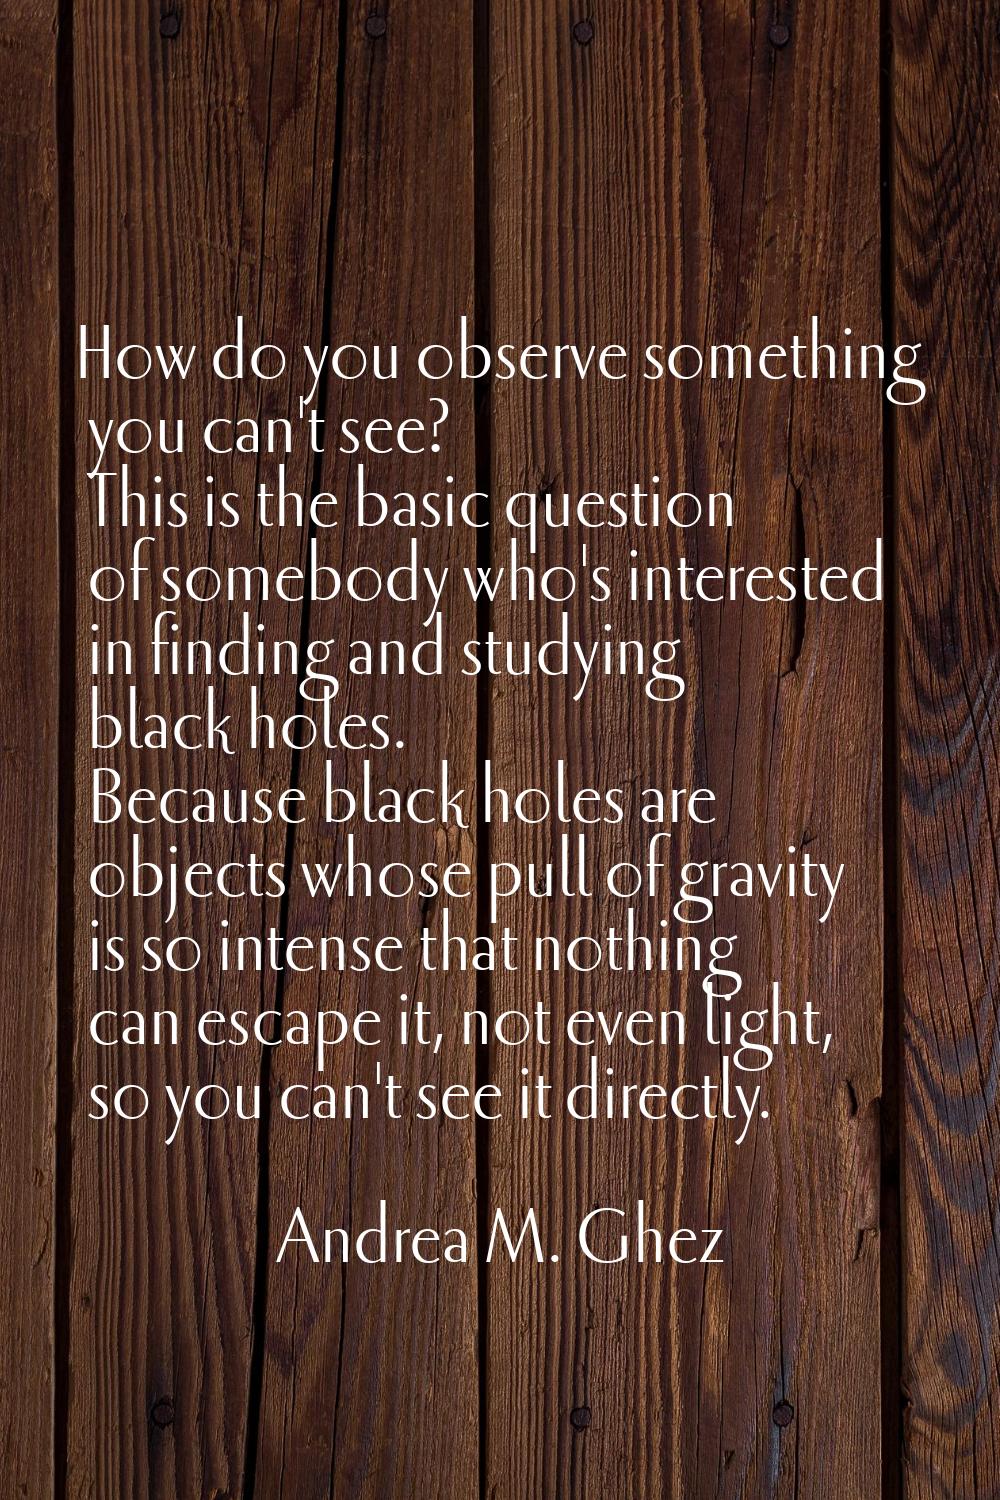 How do you observe something you can't see? This is the basic question of somebody who's interested